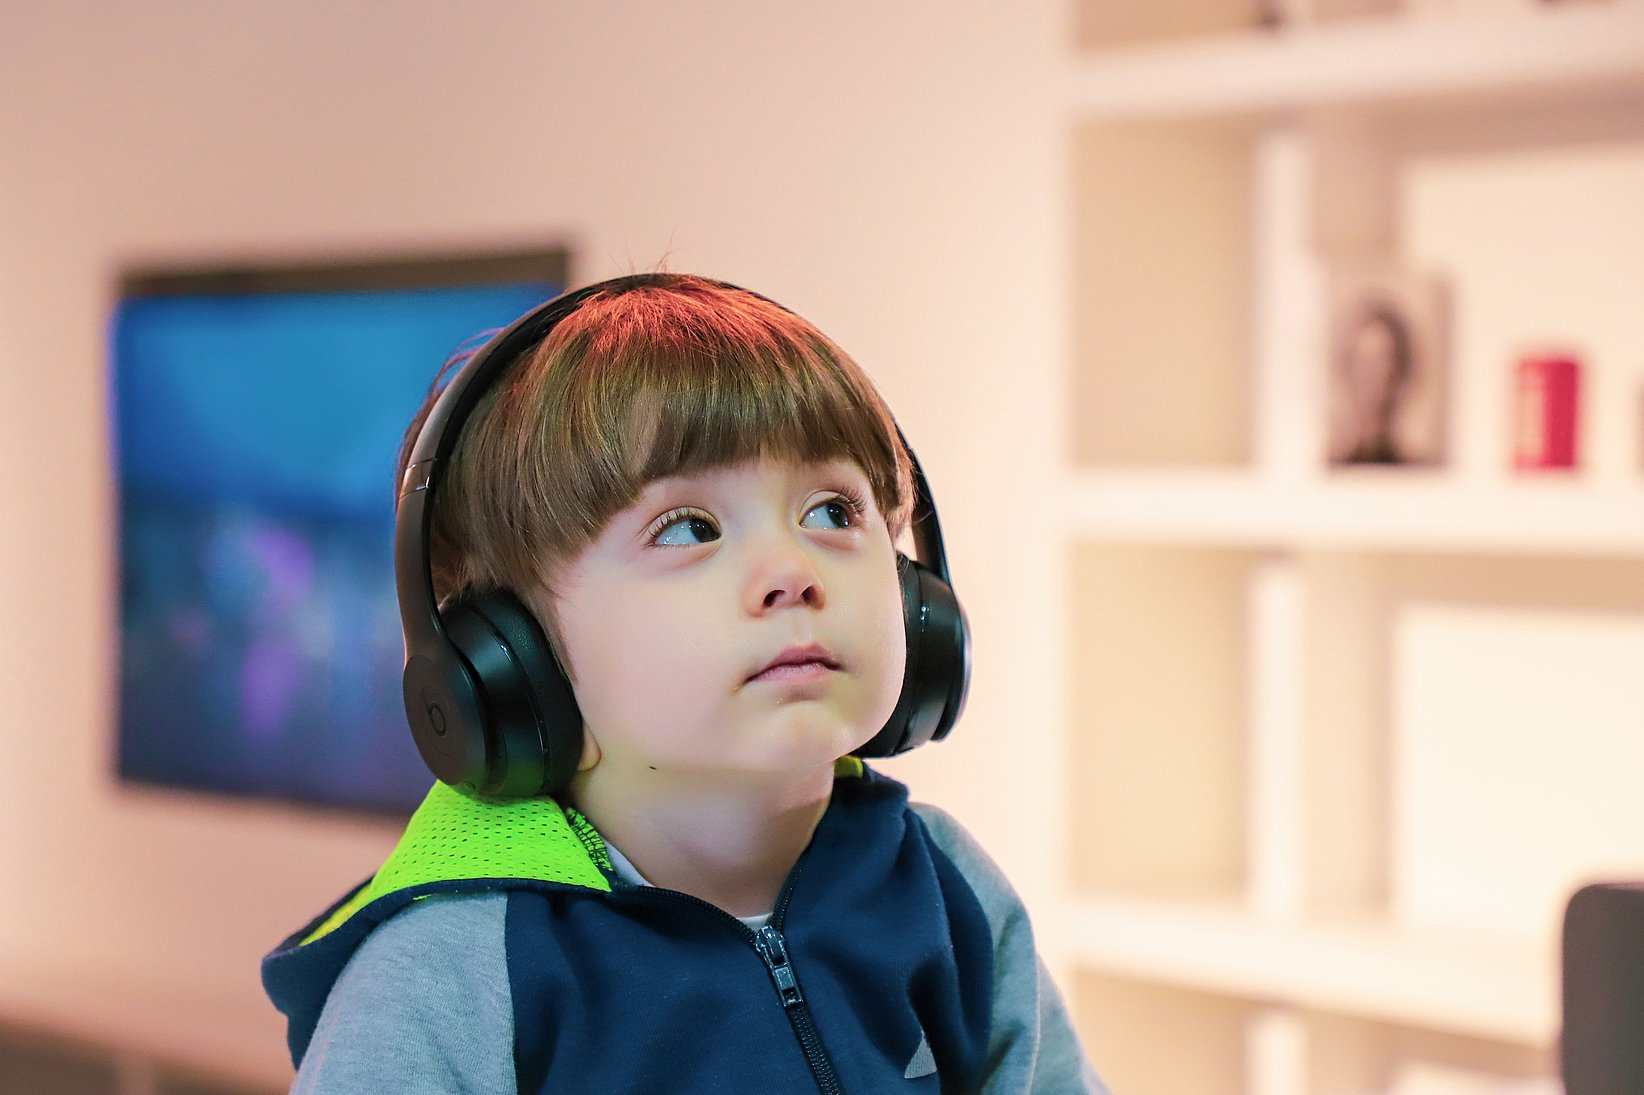 A little boy listens to a podcast with a headset and has a curious look on his face.